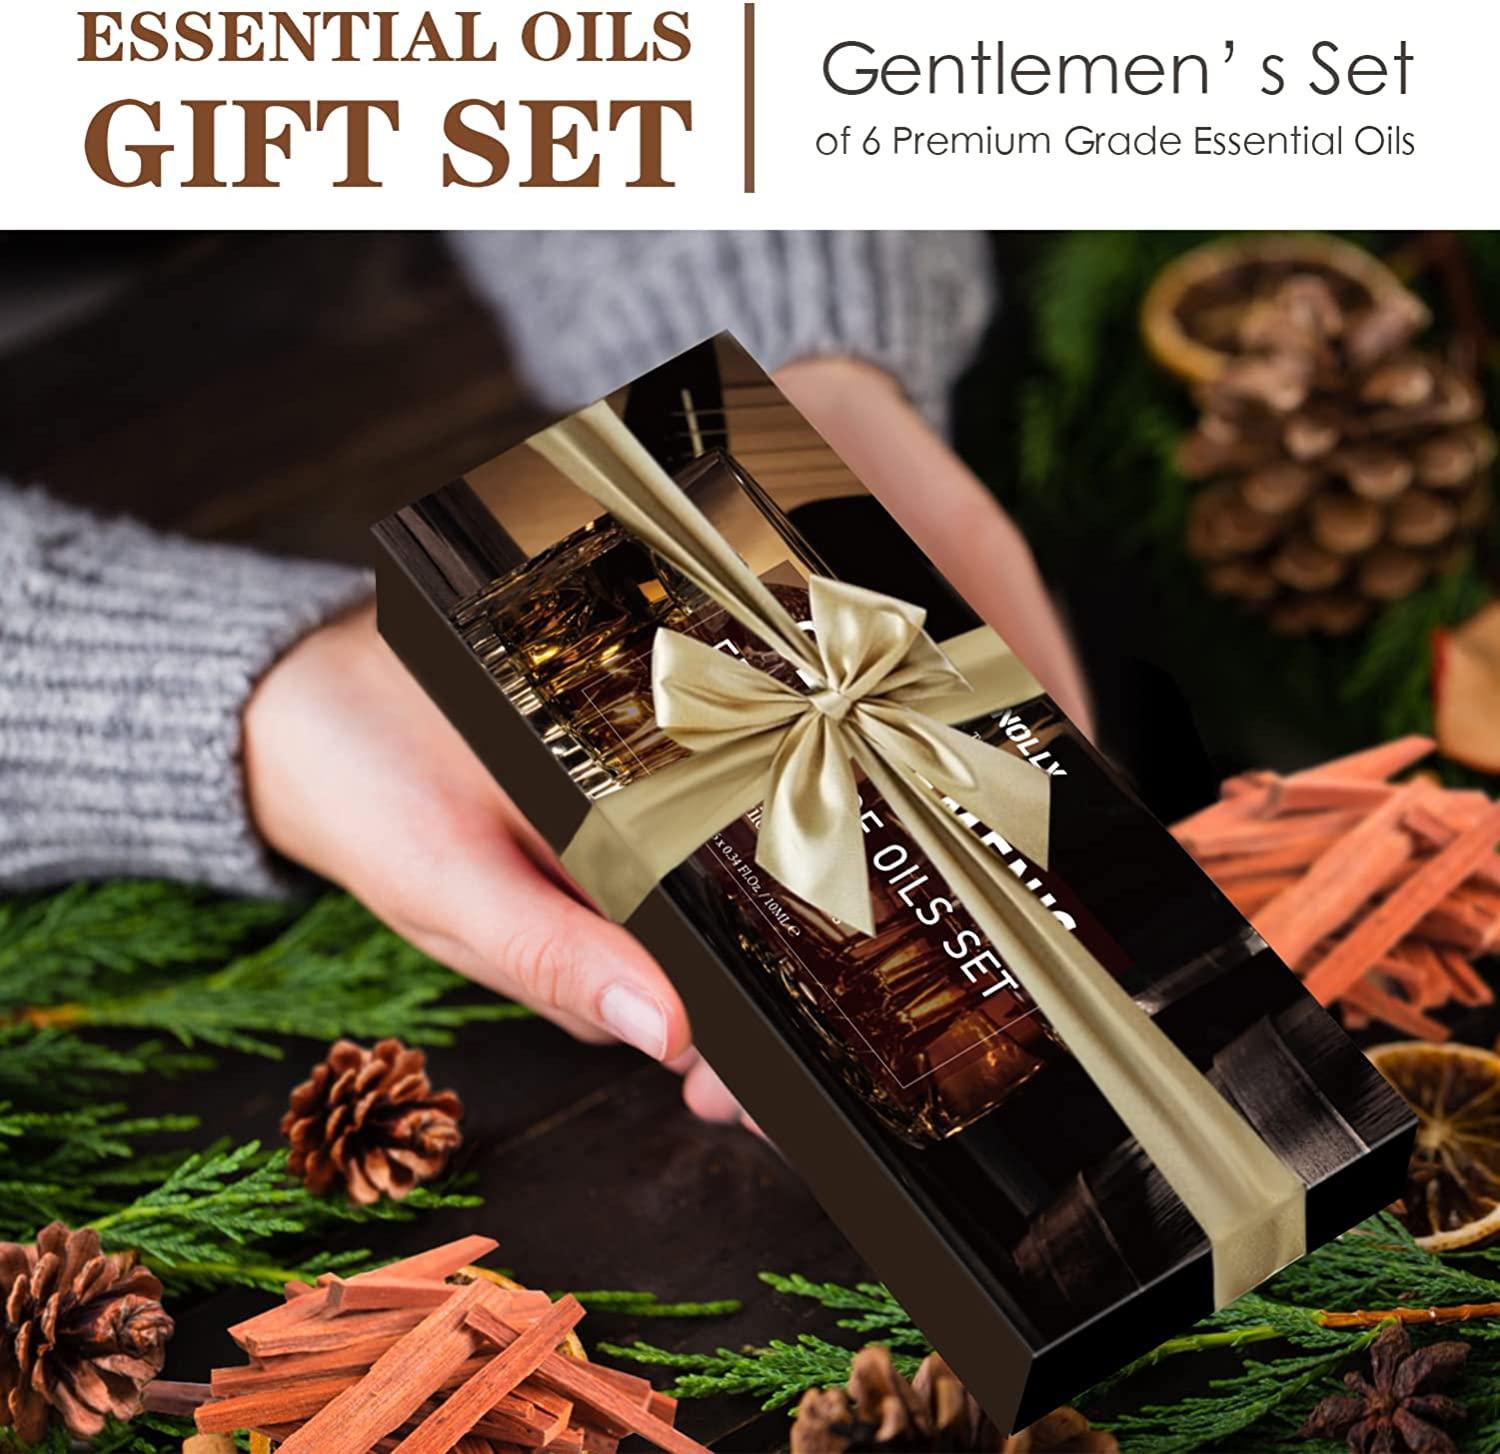 Essential Oils Set, Men Scents Fragrance Oil Aromatherapy Essential Oils  Kit for Diffuser (6x10ML) - Sandalwood, Cedar, Leather, Sweet Tobacco, Rum,  Cologne Aromatherapy Oils for Men A-Men Set